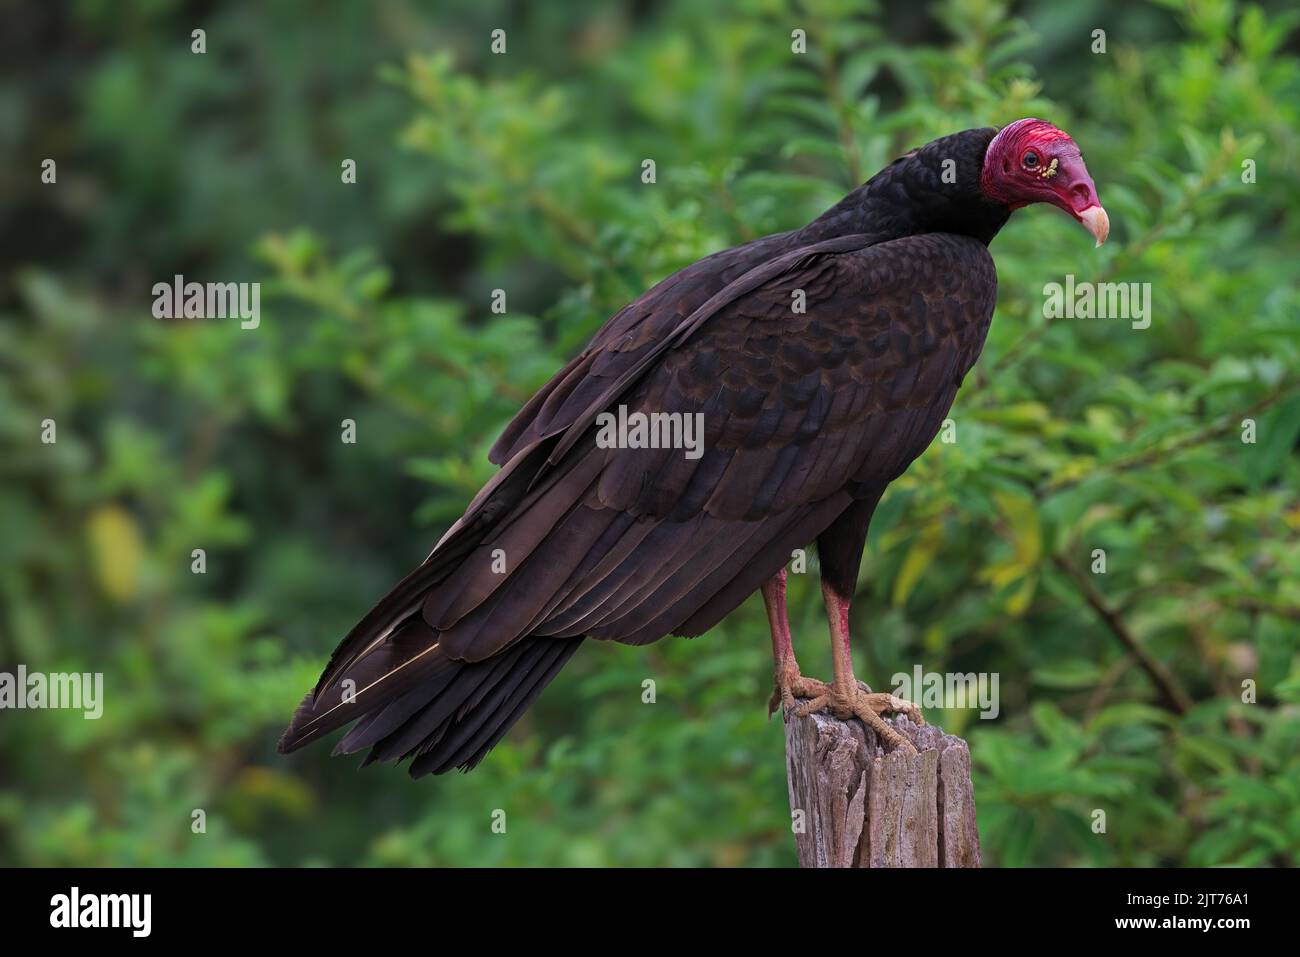 Turkey vulture, Cathartes aura, shown perched. Image taken in Chiriqui, Panama. Stock Photo